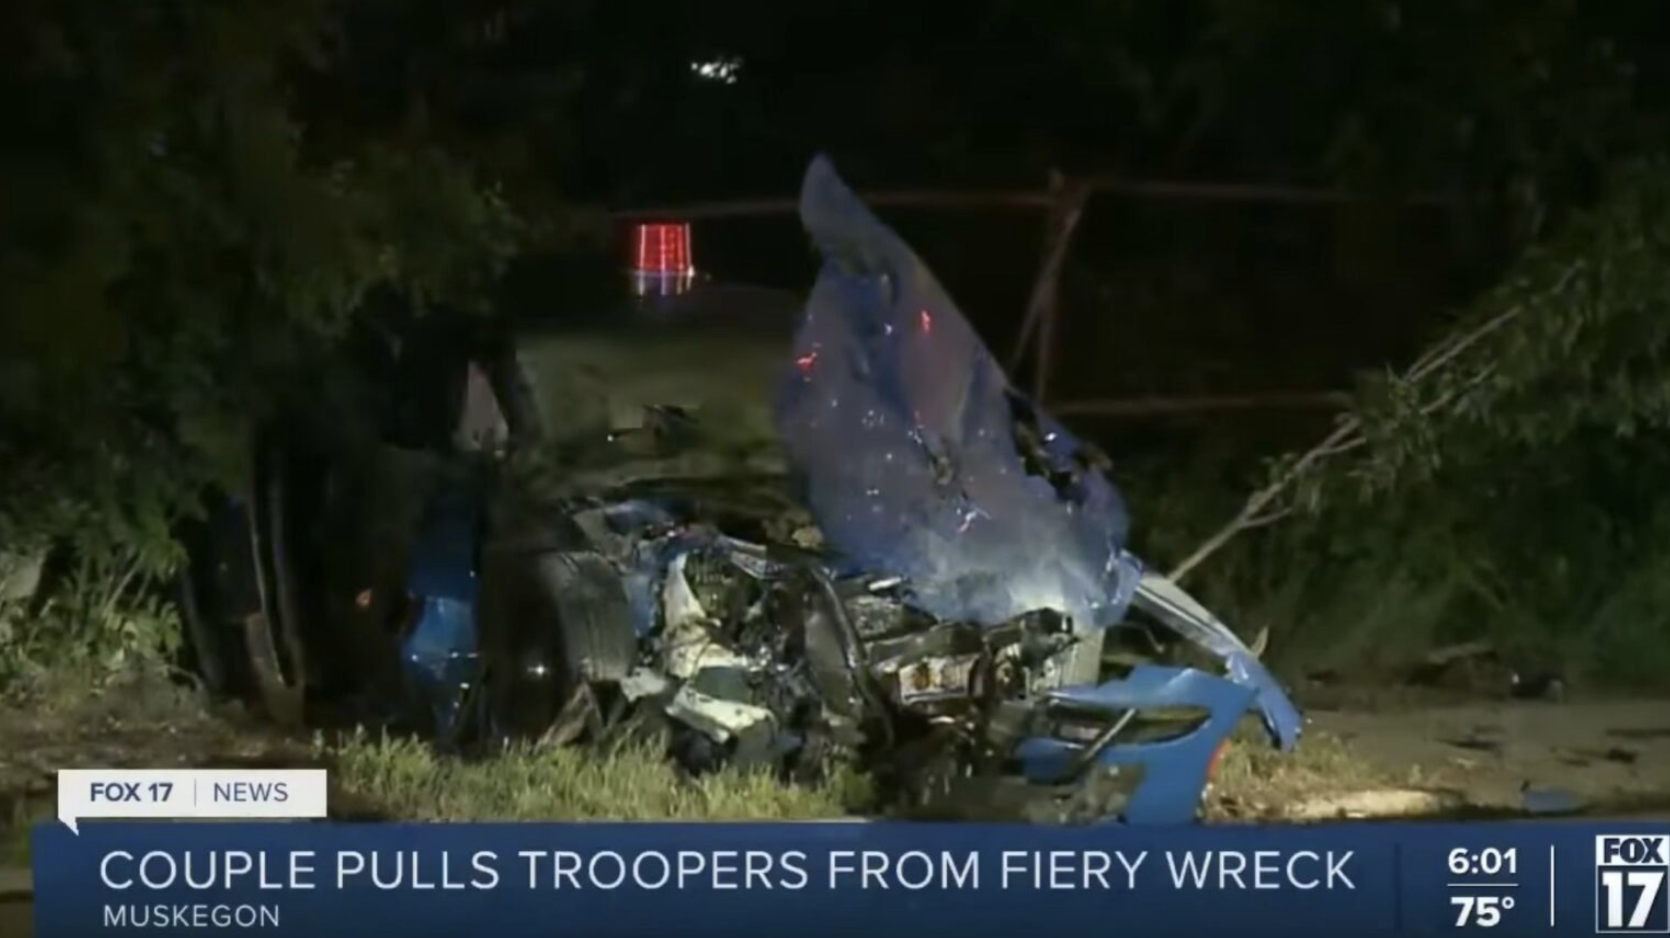 good-samaritans-pull-state-troopers-from-fiery-wreck-american-liberty